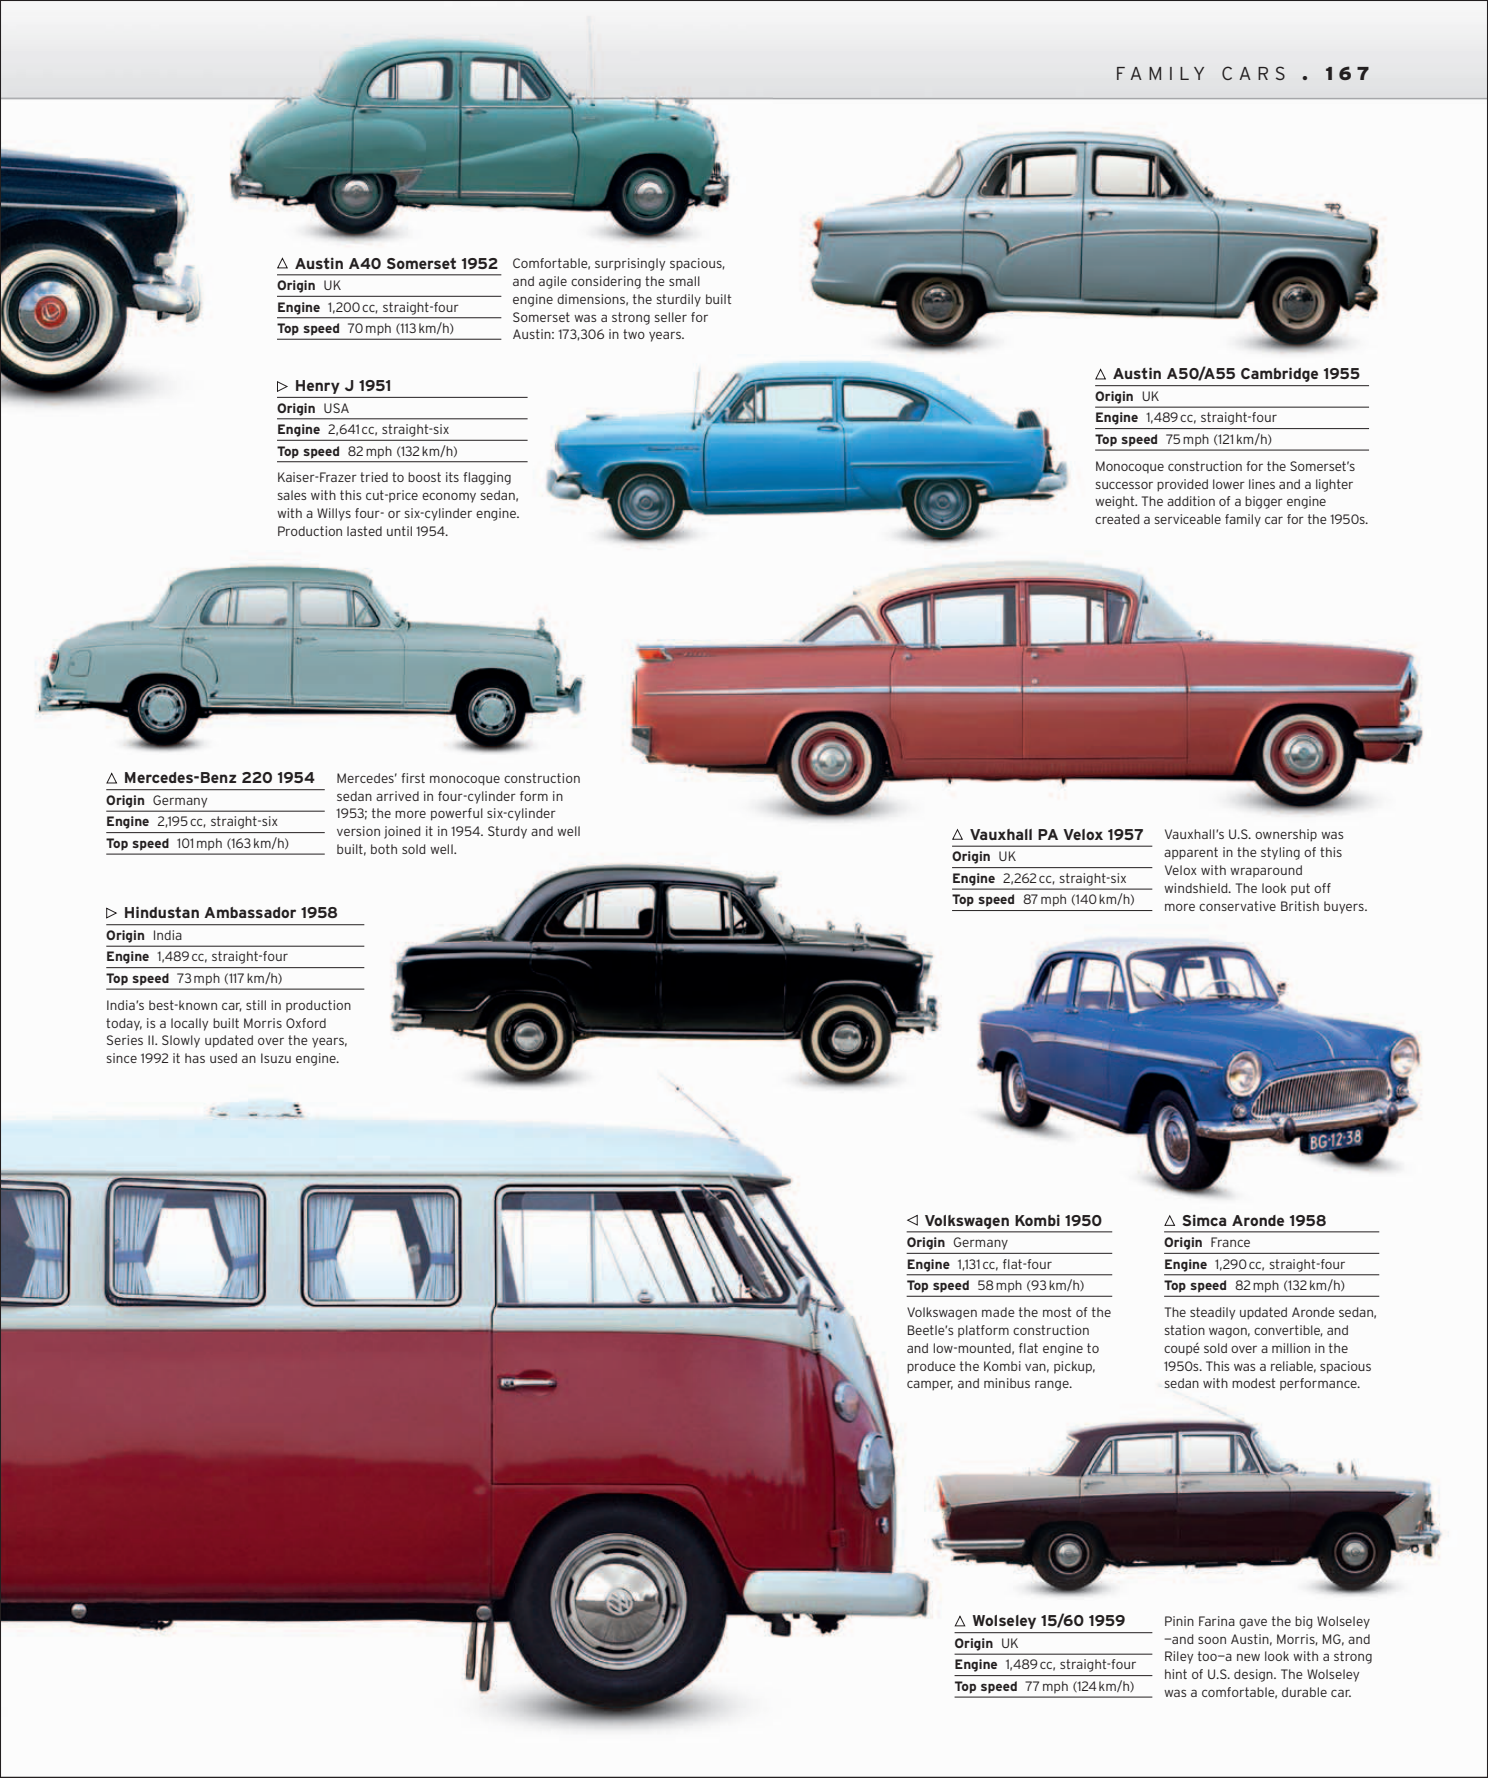 Car%20-%20The%20Definitive%20Visual%20History%20of%20the%20Automobile_169.png